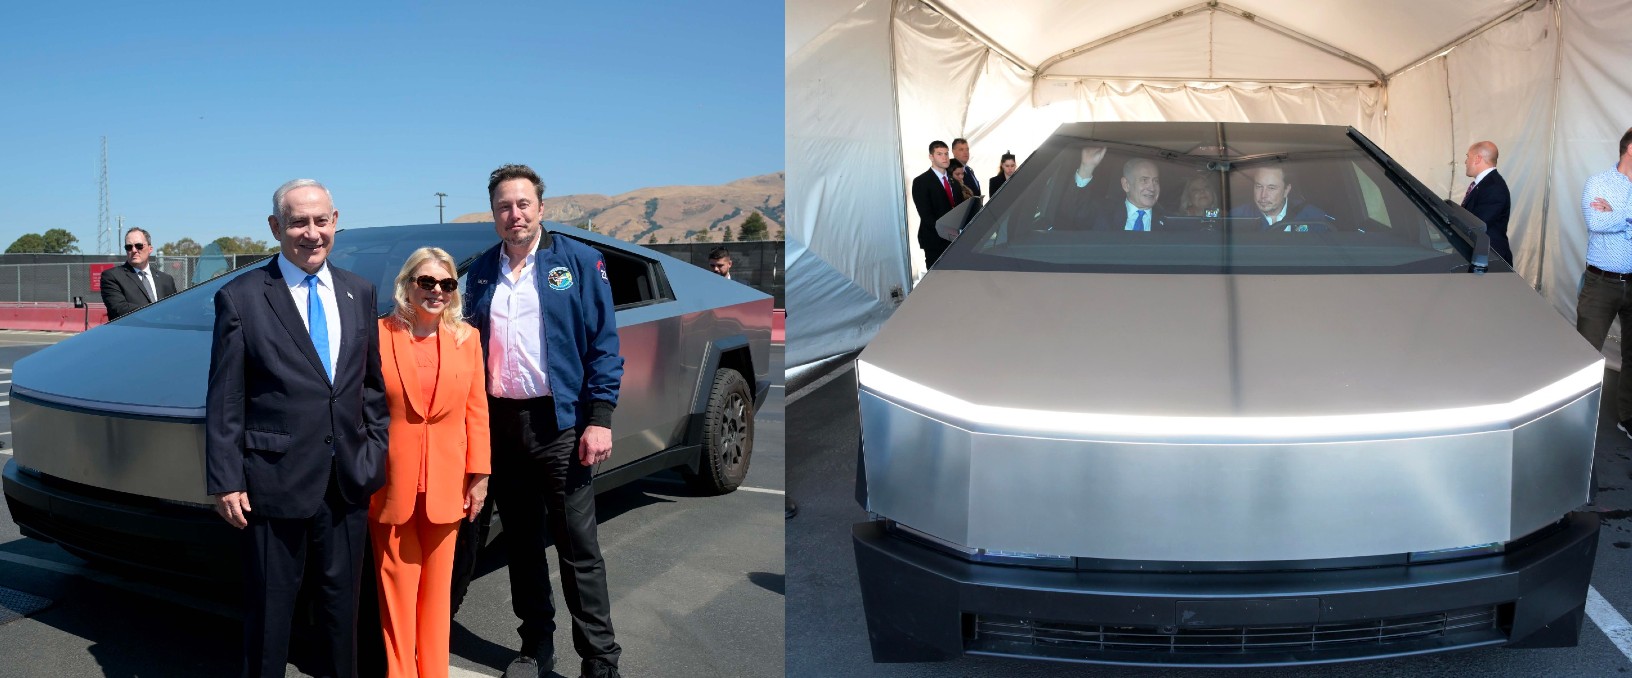 Elon Musk takes Prime Minister of Israel for a ride in a Tesla Cybertruck